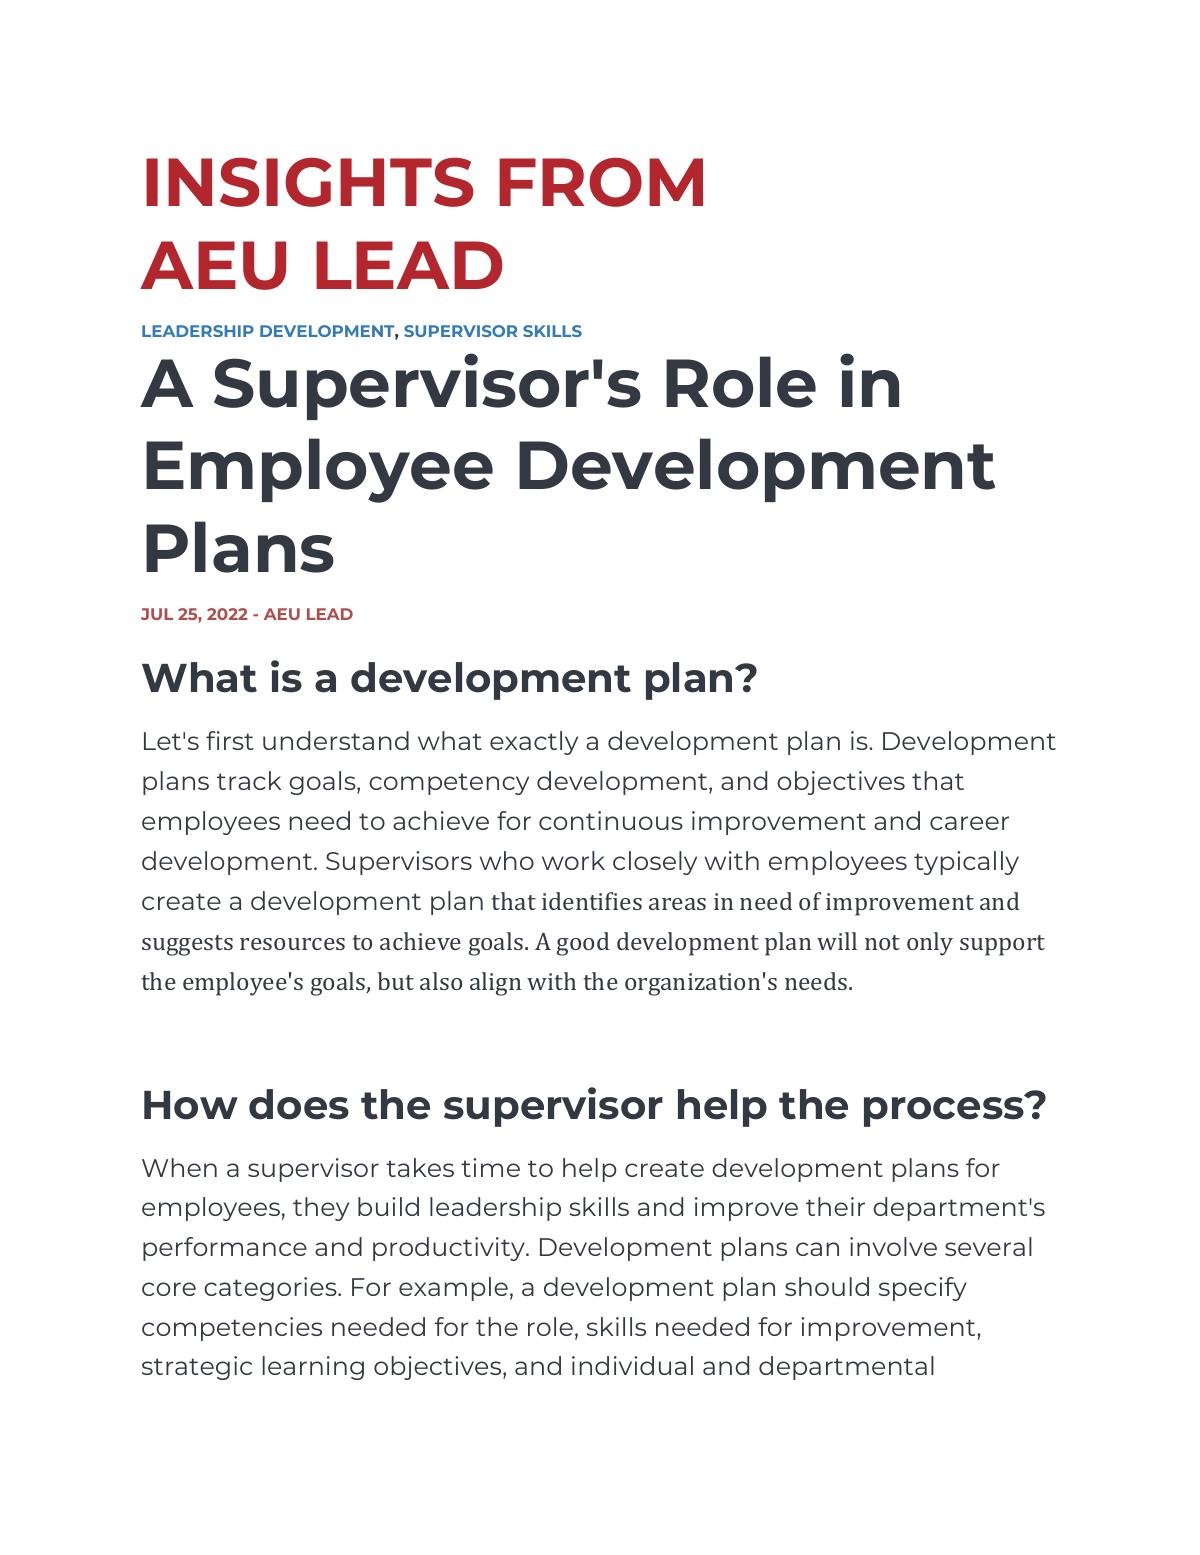 A Supervisor's Role in Employee Development Plans